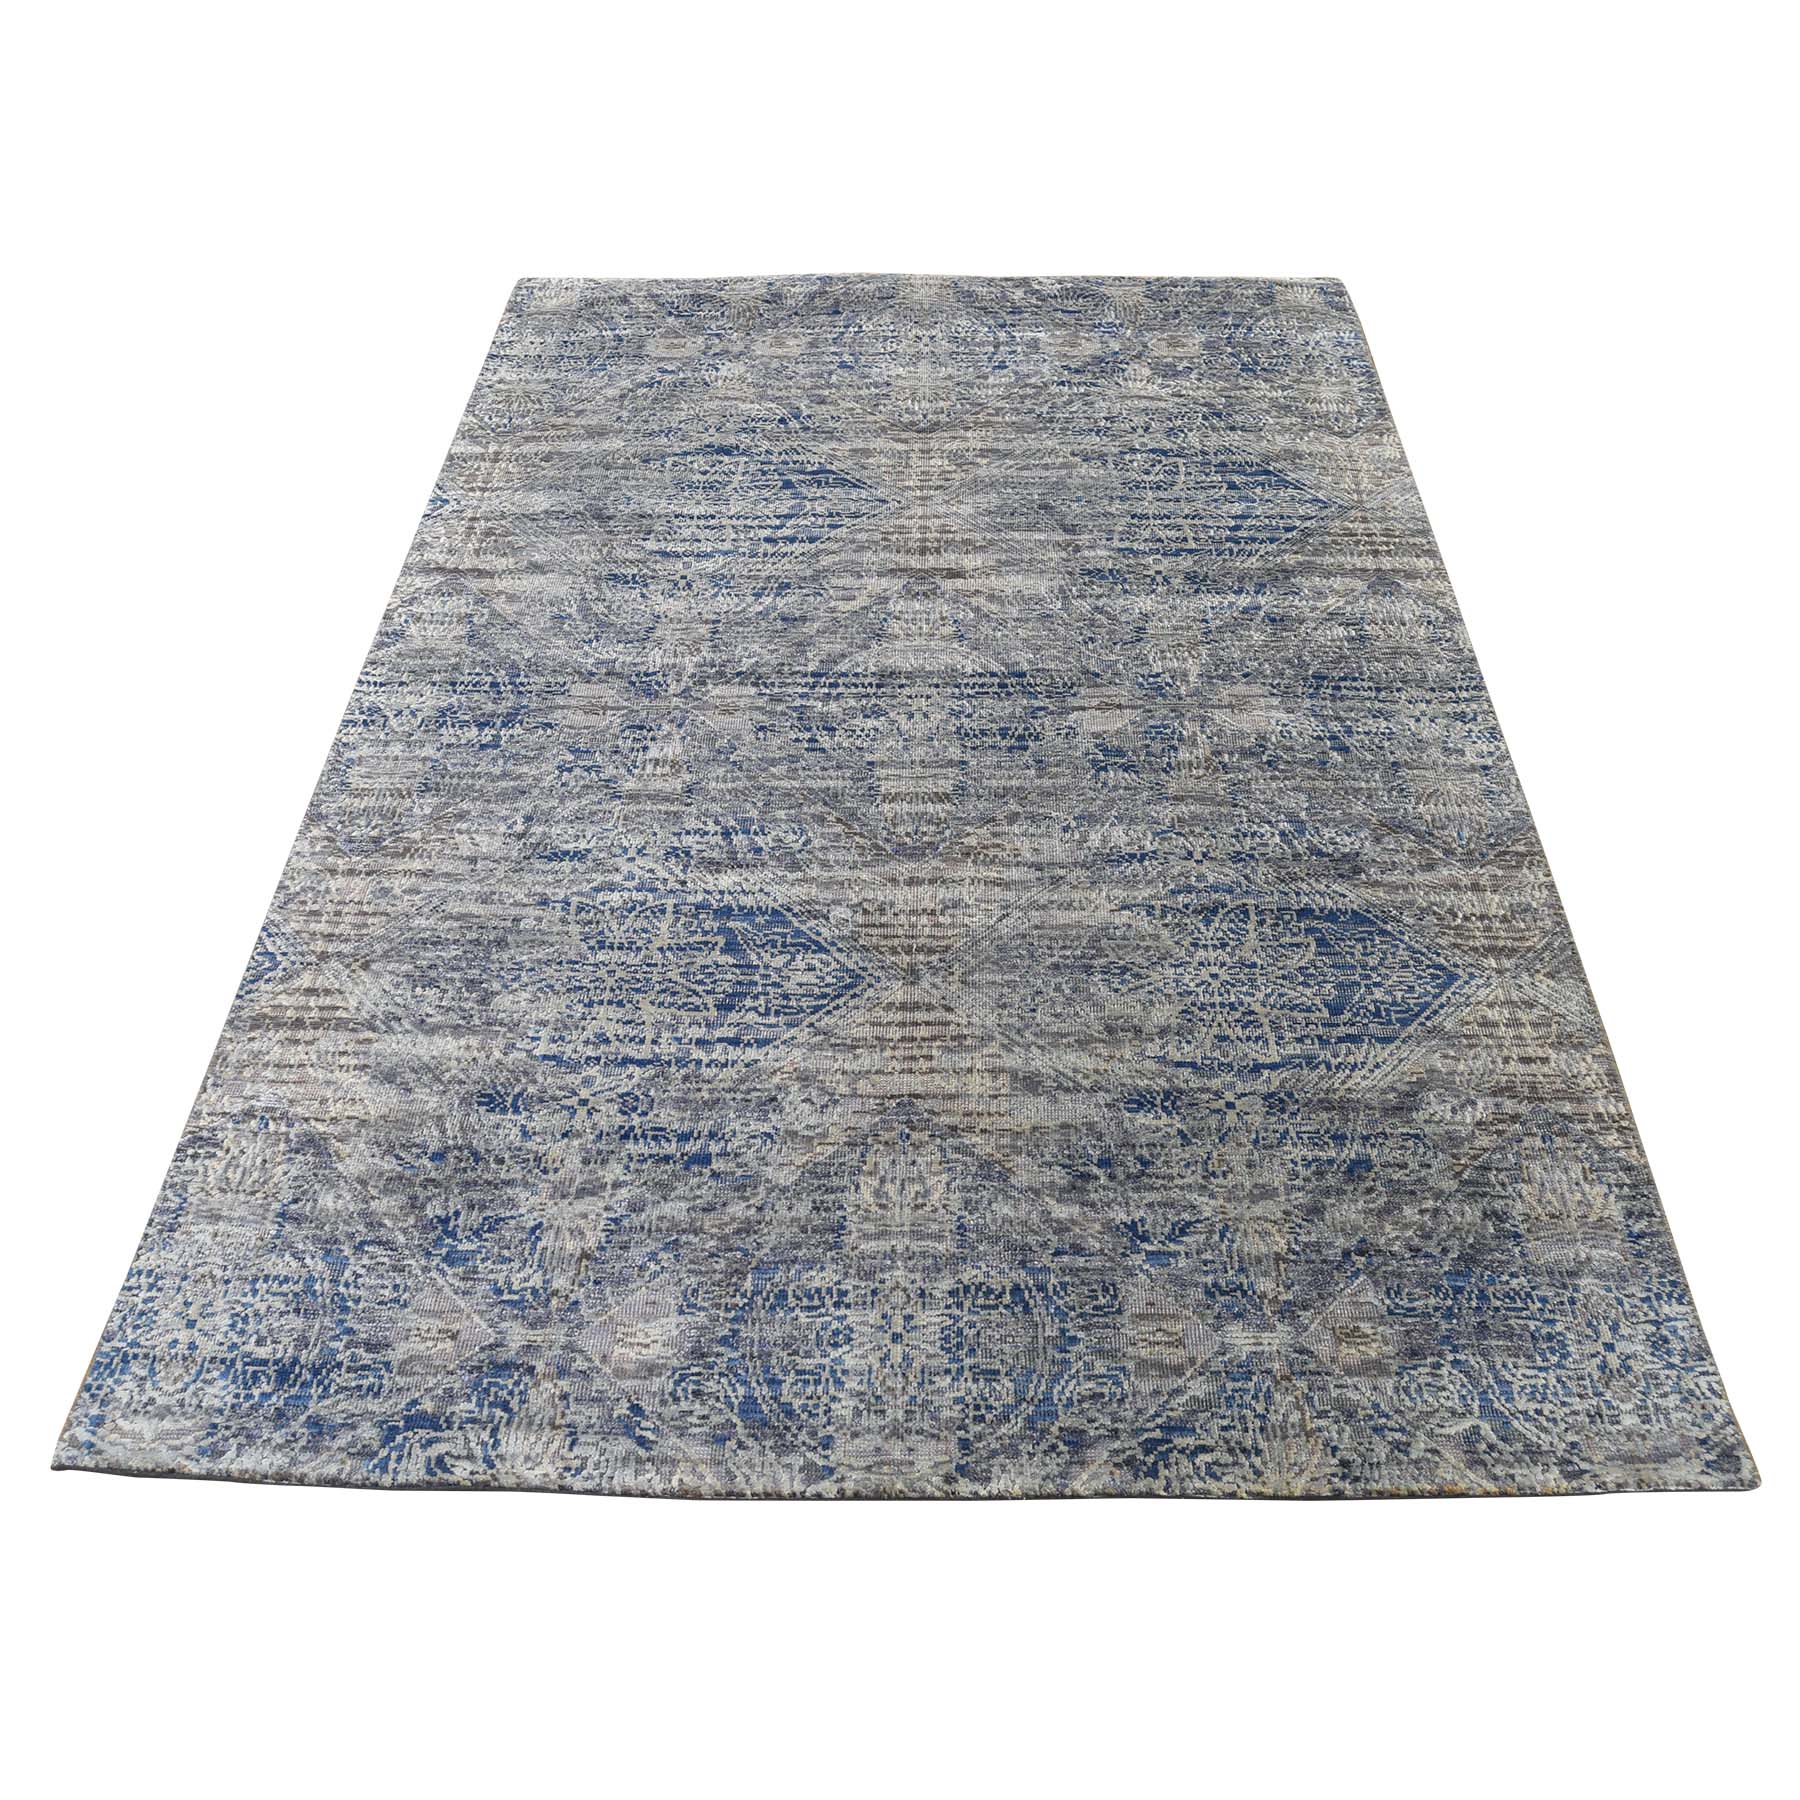 4-x6-2  Silk With Oxidized Wool Denim Blue Erased Rossette Design Hand-Knotted Oriental Rug 